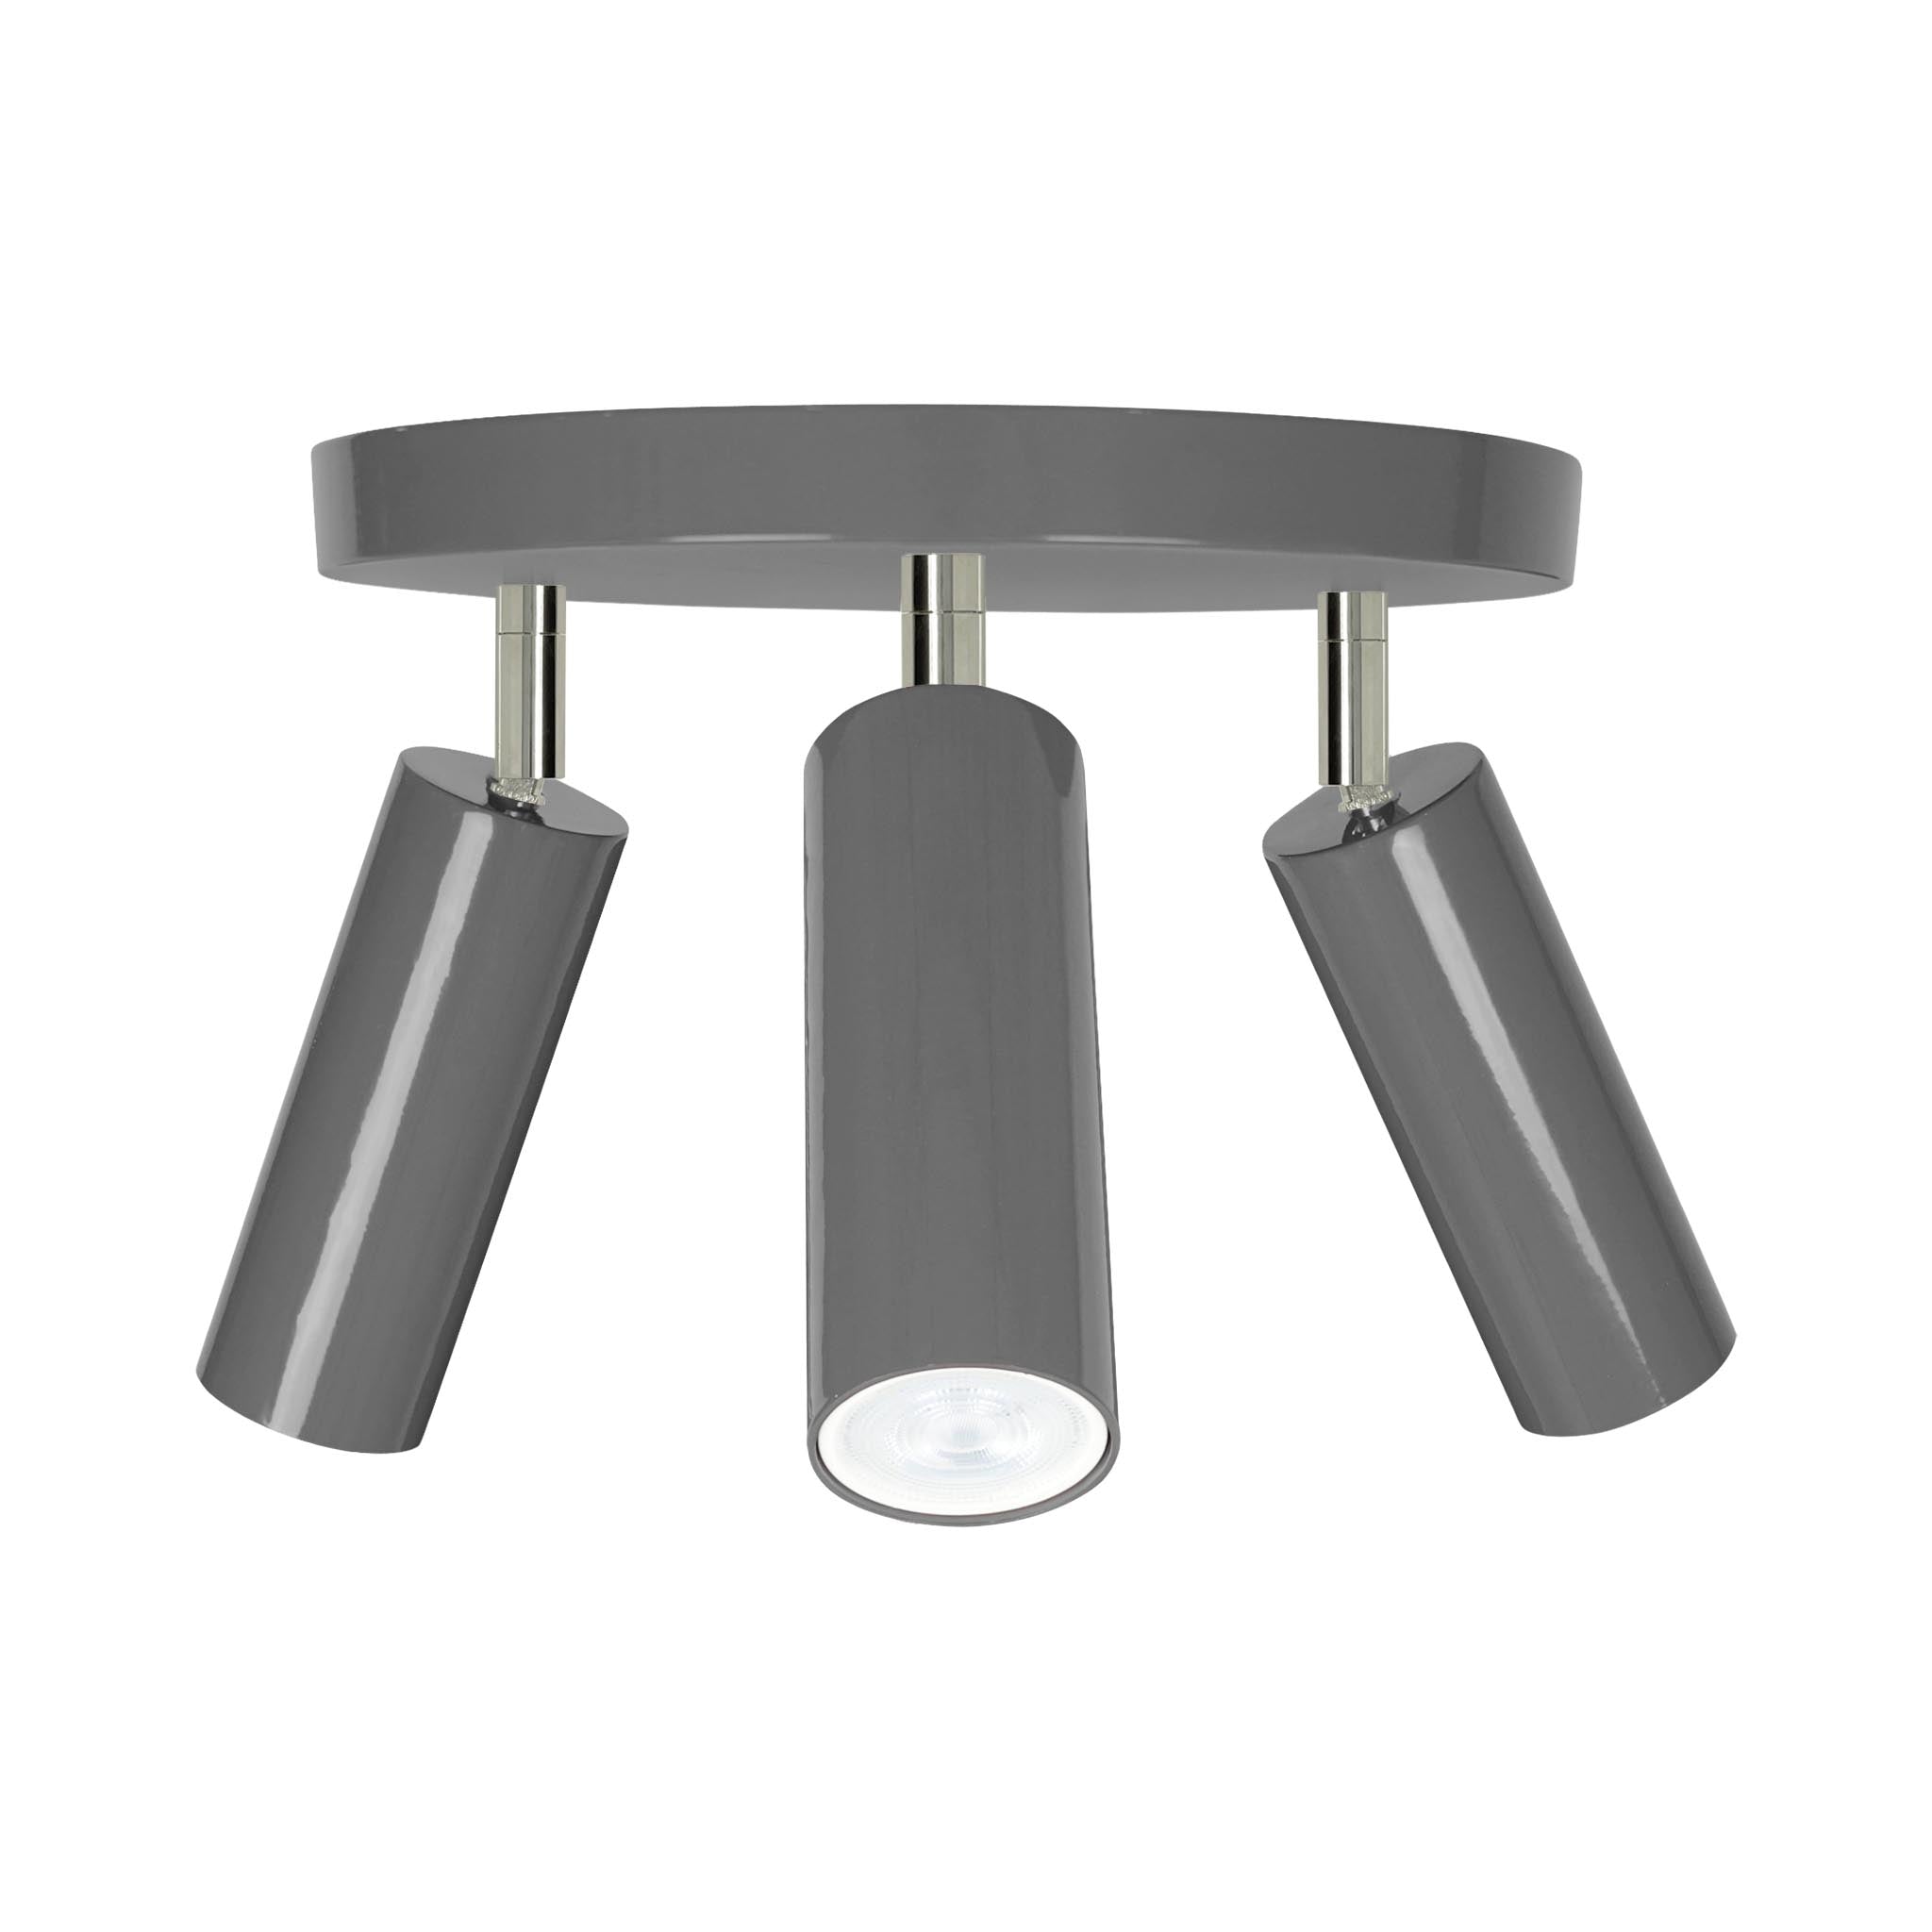 Nickel and charcoal color Pose flush mount Dutton Brown lighting